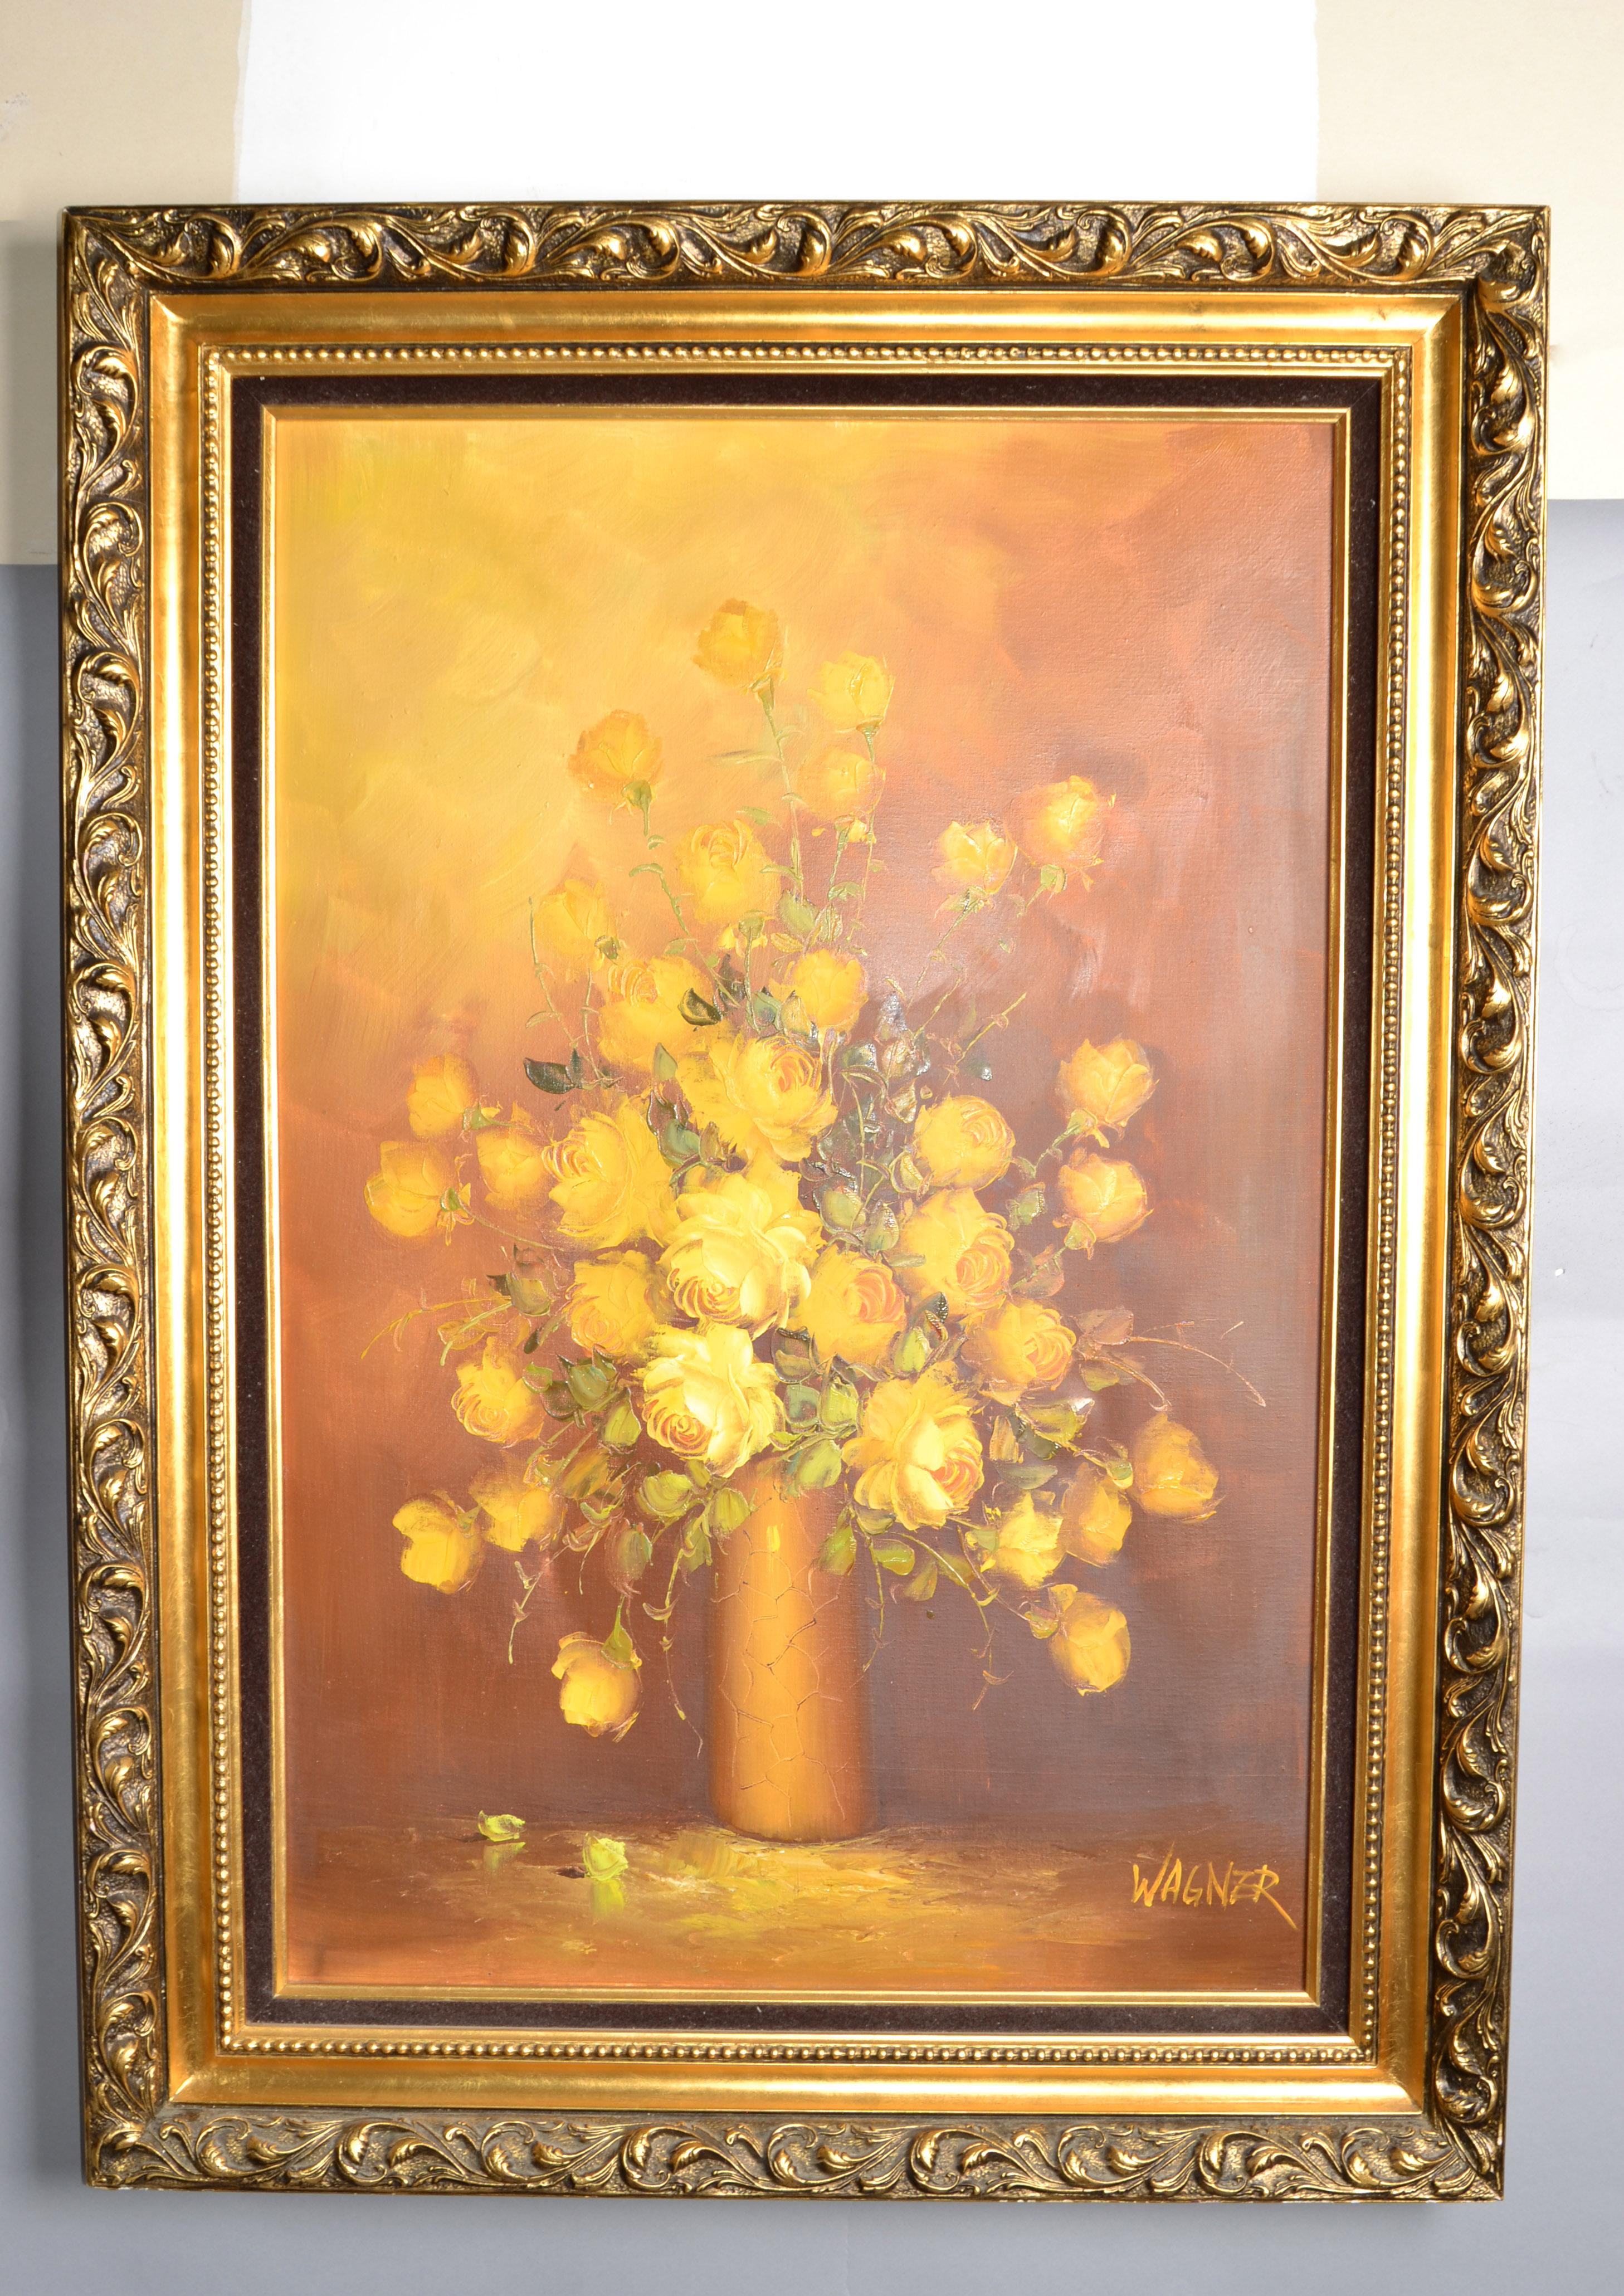 Hand-Painted F. Wagner Framed Classical Floral Still Life Roses Painting Oil on Canvas, 1972 For Sale